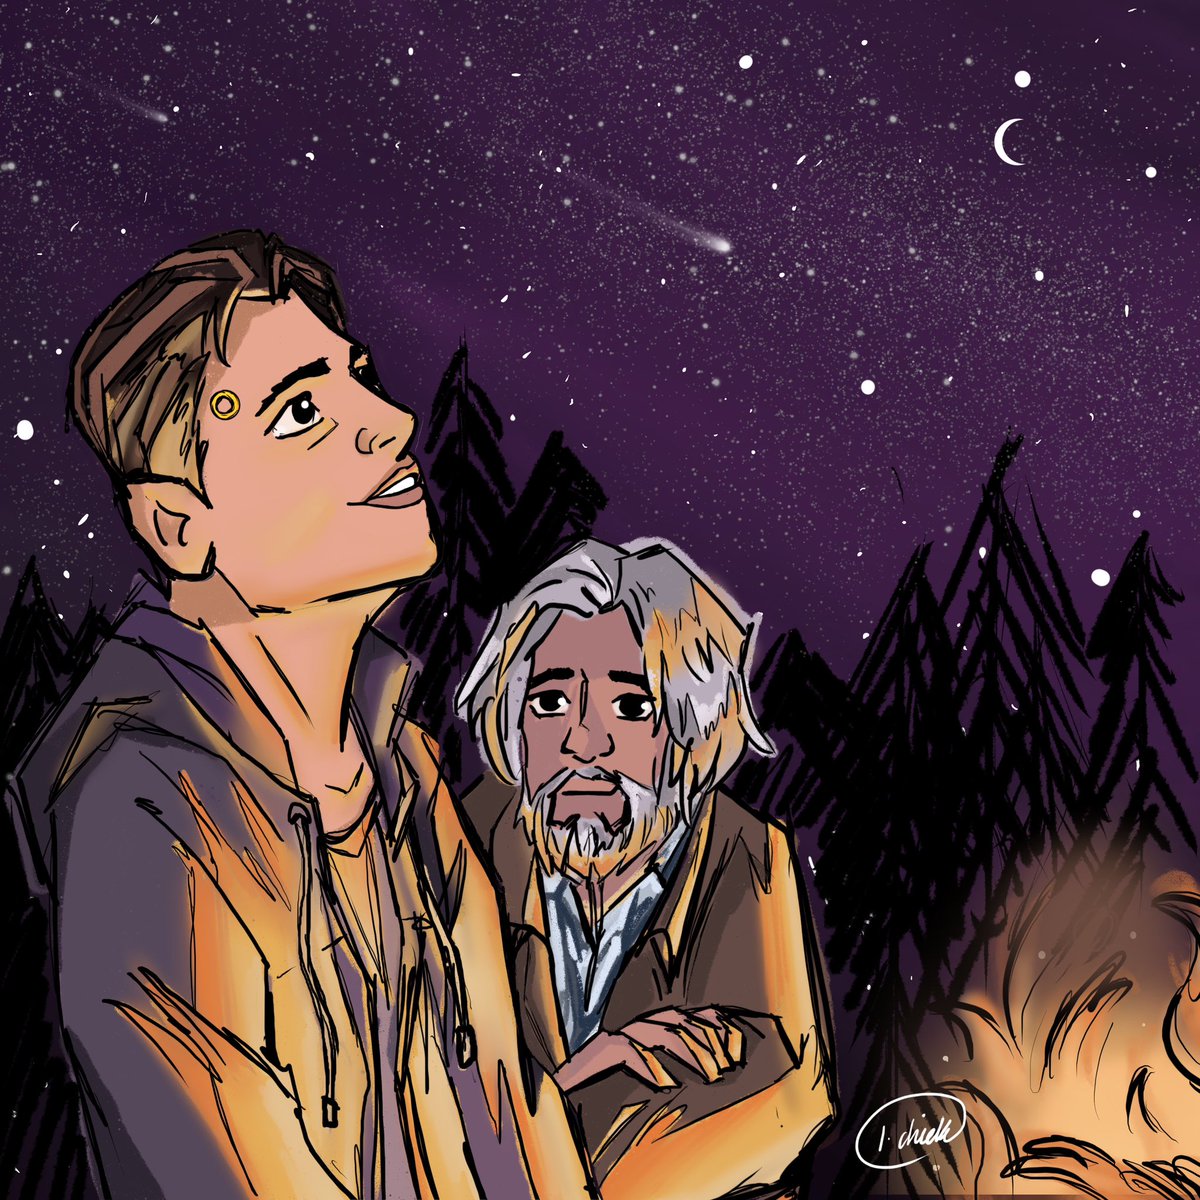 #DechARTJune
Day 8: Explore

Connor and Hank exploring the cosmos ✨💫 
I’m not the best at drawing people but I think this turned out ok. #DechartGames